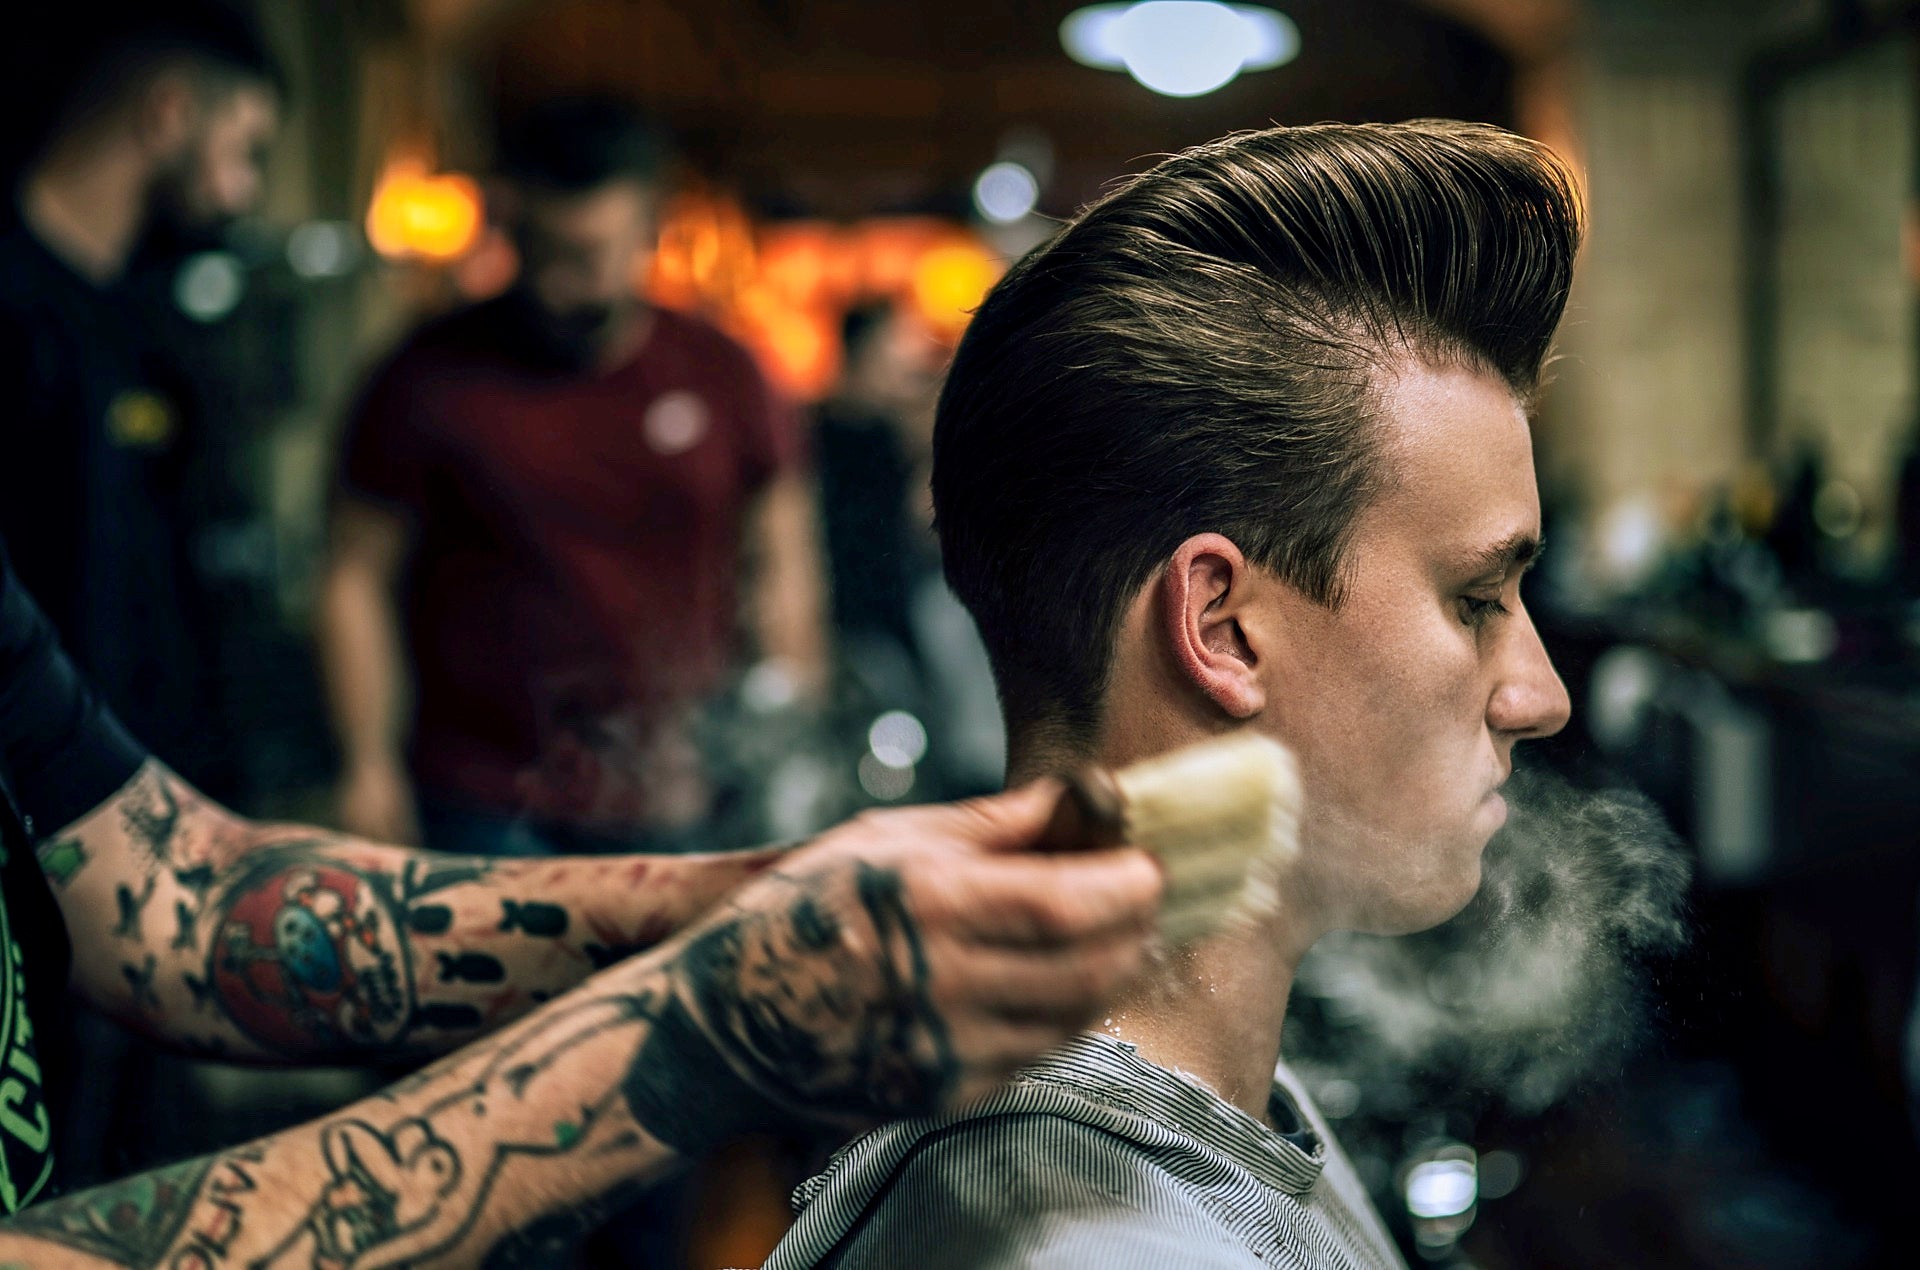 Stylish guy with a fresh haircut sporting a classic pomp hairstyle. (Photo by André Reis on Unsplash)